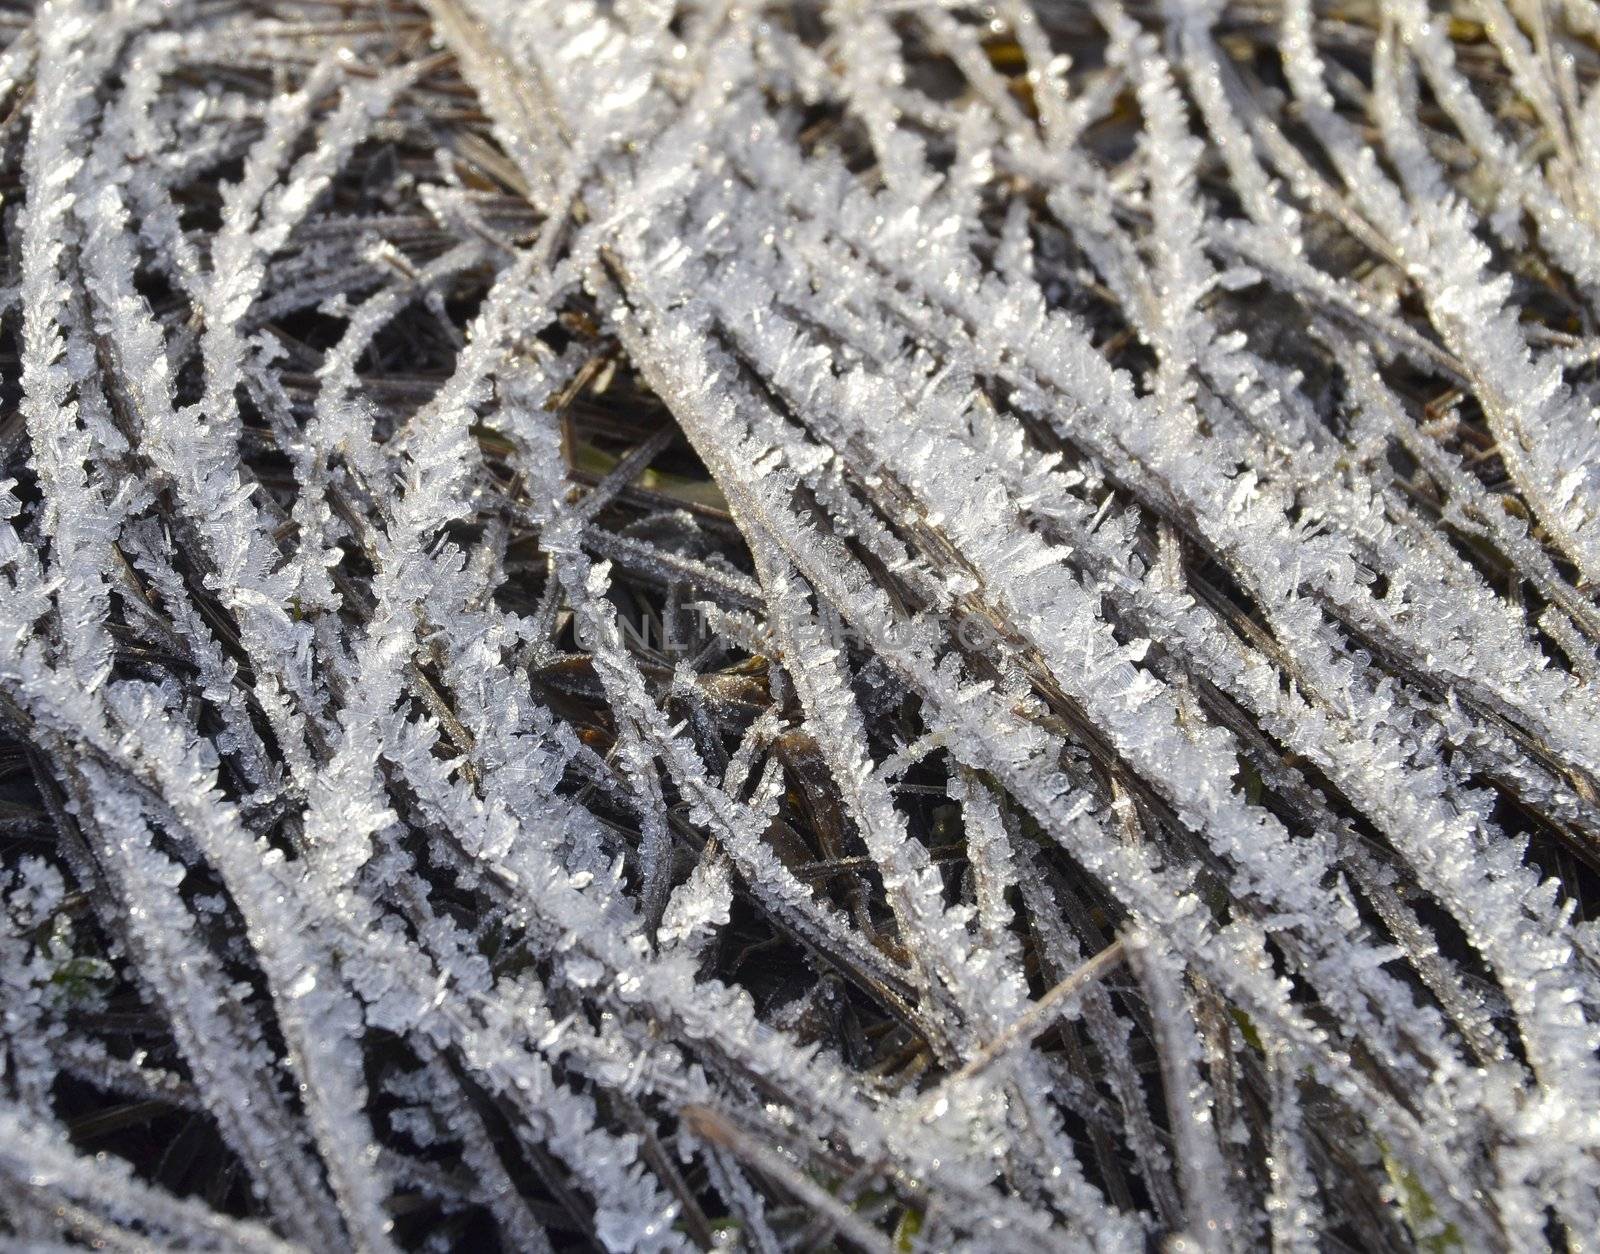 desiccated grass sprinkled with white crystals of ice